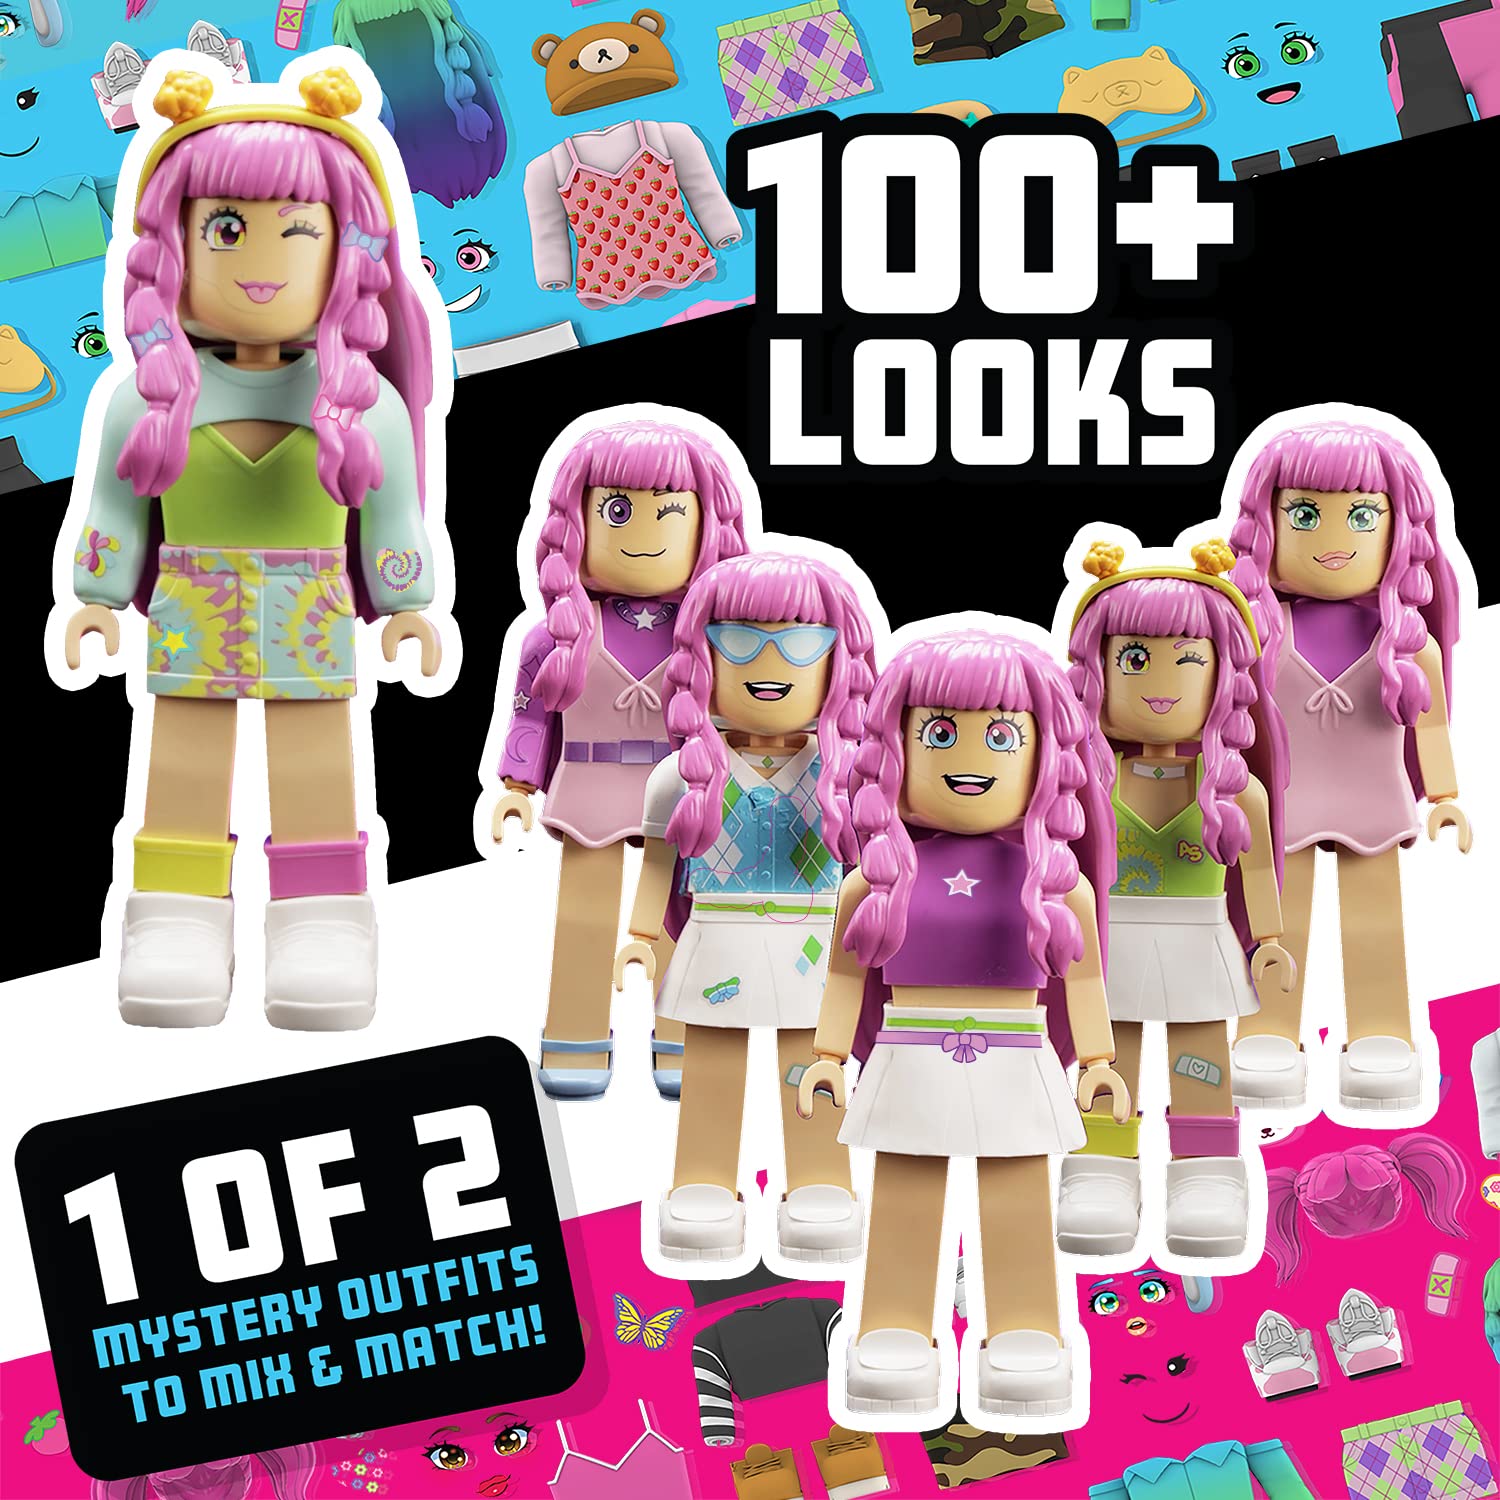 My Avastars KawaiiPie^^ – 11" Fashion Doll with Extra Outfit – Personalize 100+ Looks